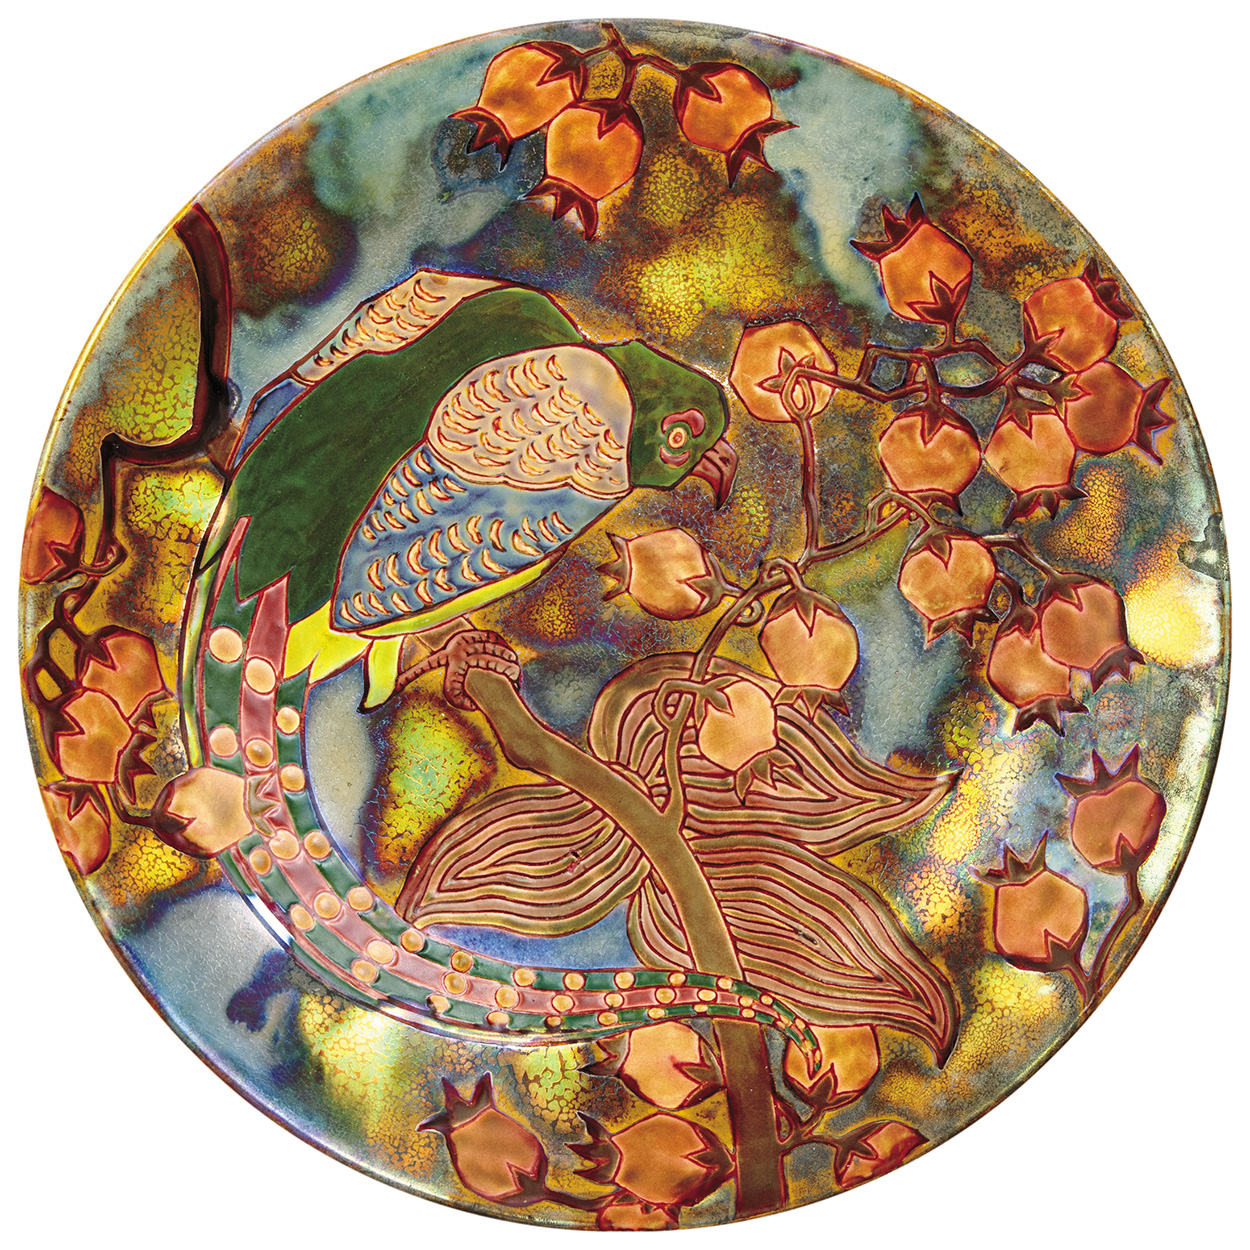 Zsolnay Wall-Plaque with a Bird of Paradise Sitting on a Branch of Medlar, Zsolnay, 1902, DEKOR PLAN PRESUMABLY BY: BRAUN FERENC